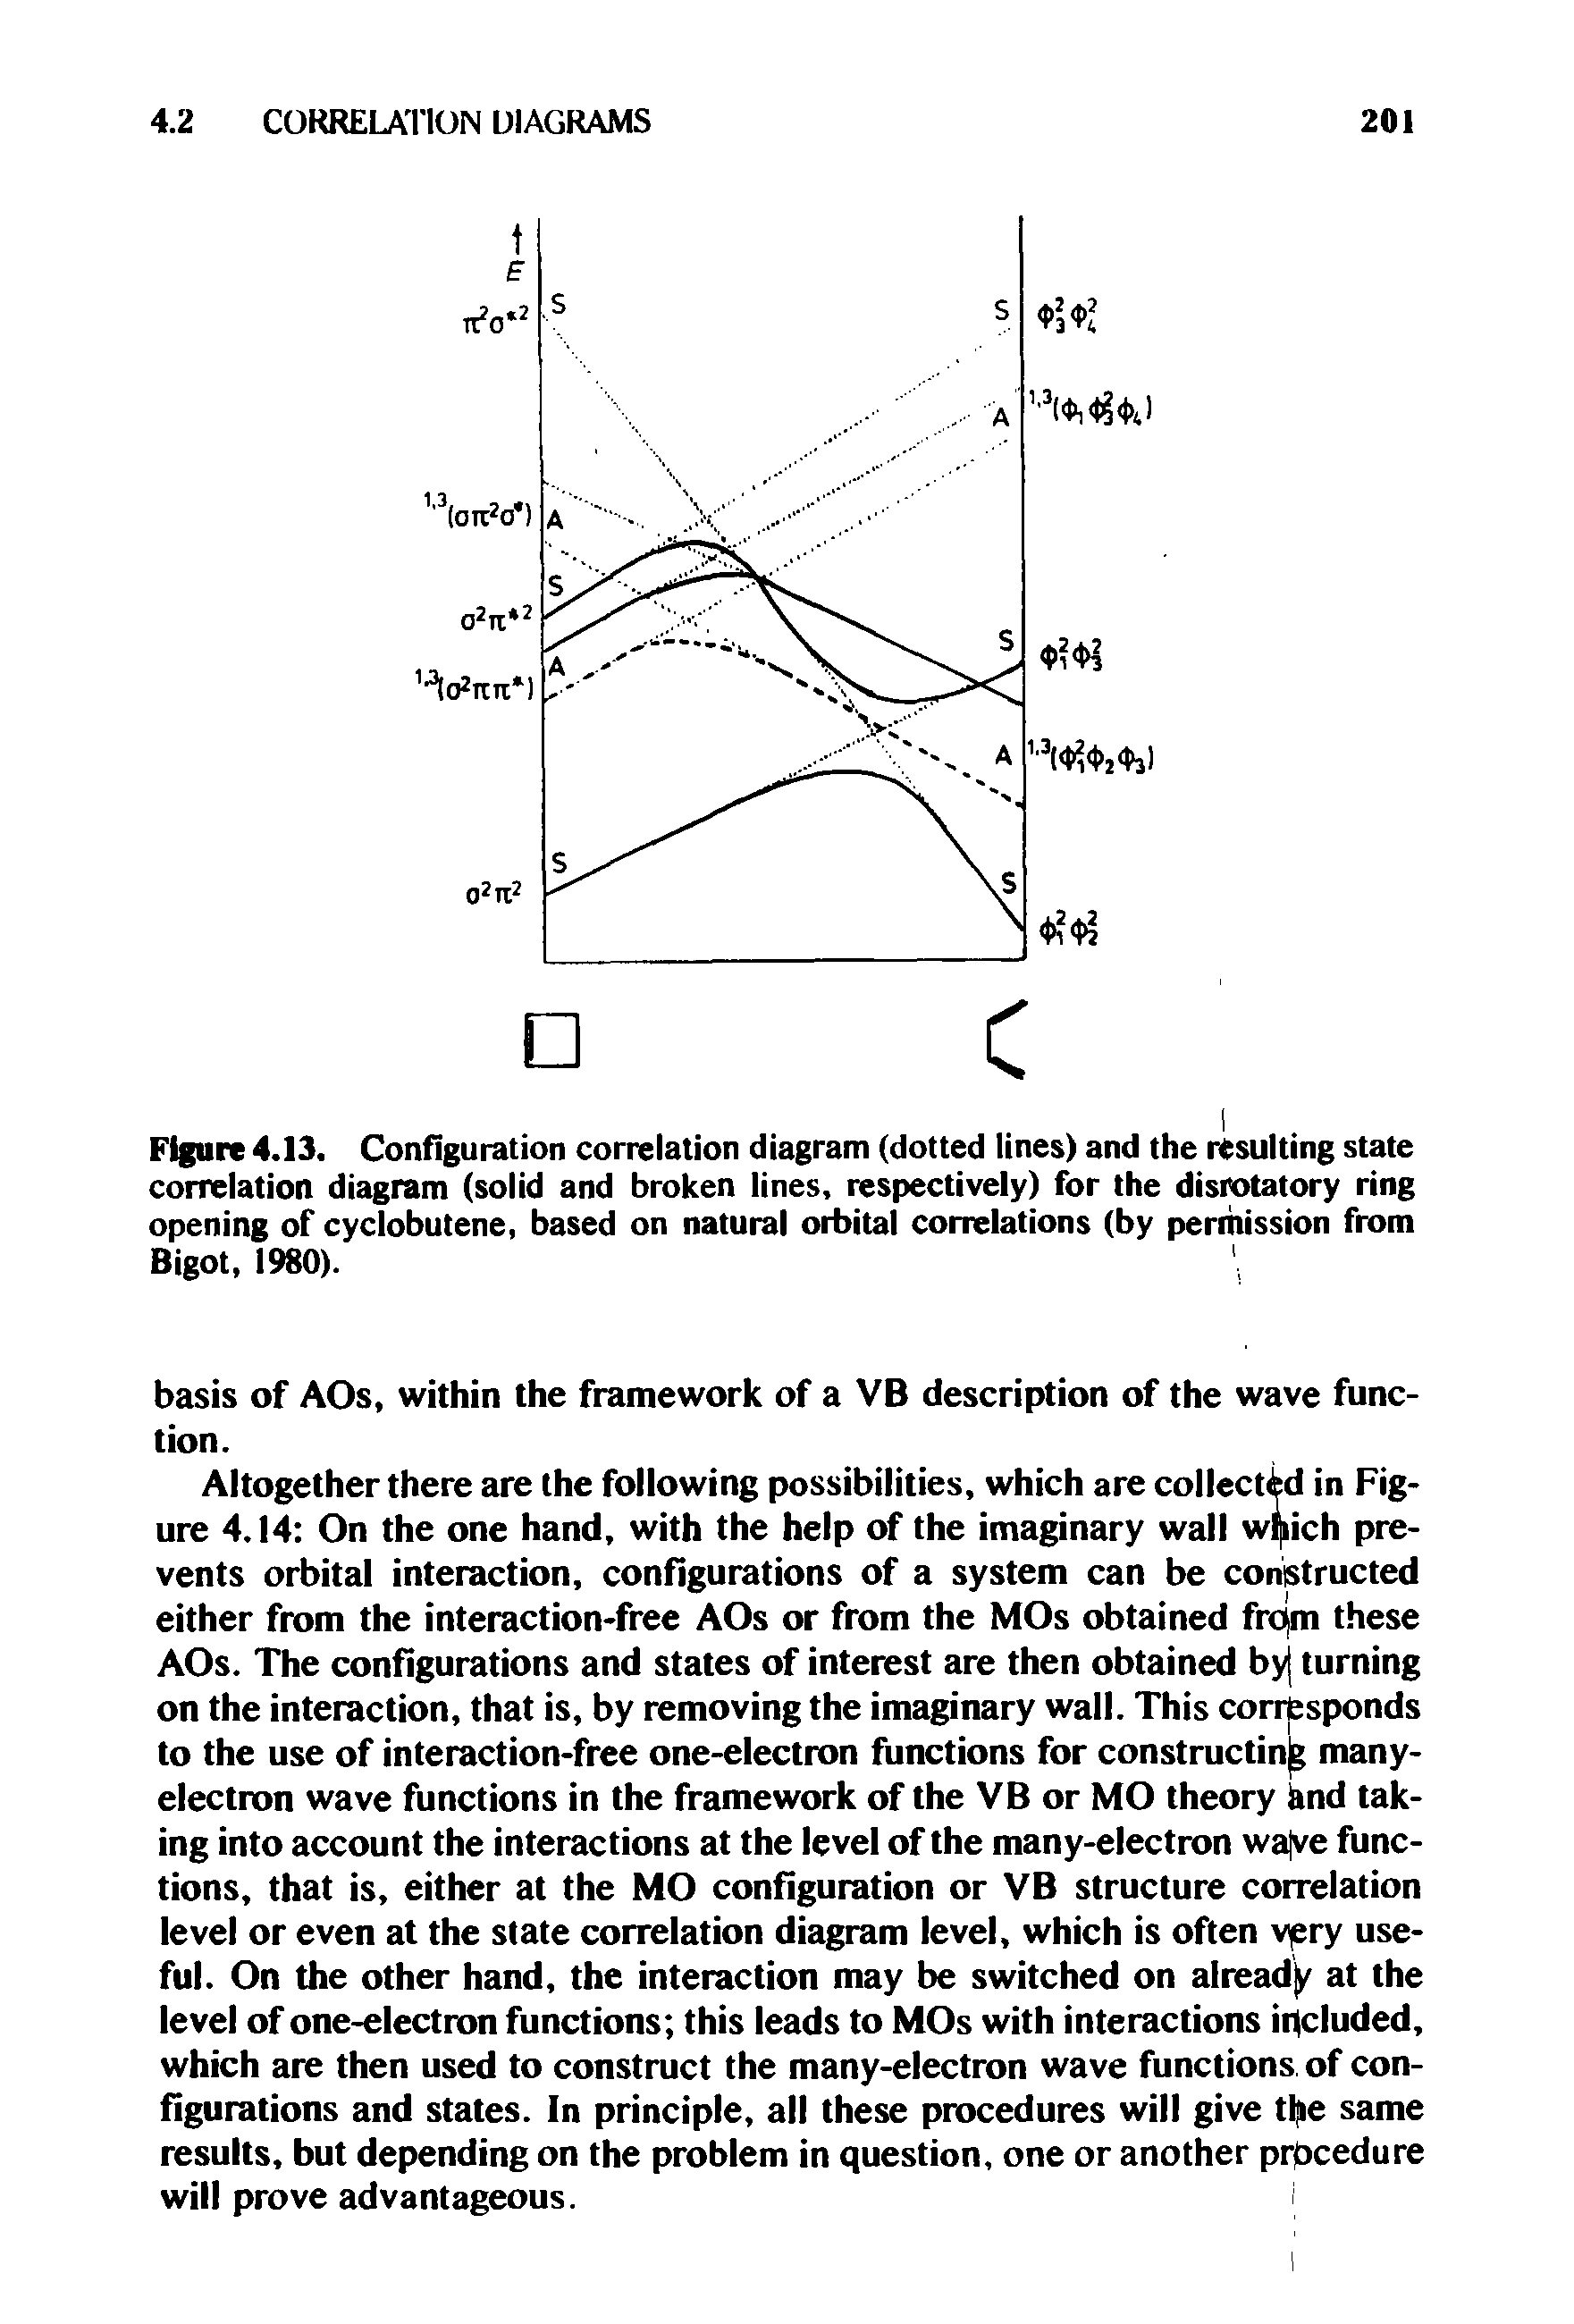 Figure 4.13. Configuration correlation diagram (dotted lines) and the resulting state correlation diagram (solid and broken lines, respectively) for the disrotatory ring opening of cyclobutene, based on natural orbital correlations (by perihission from Bigot, 1980).